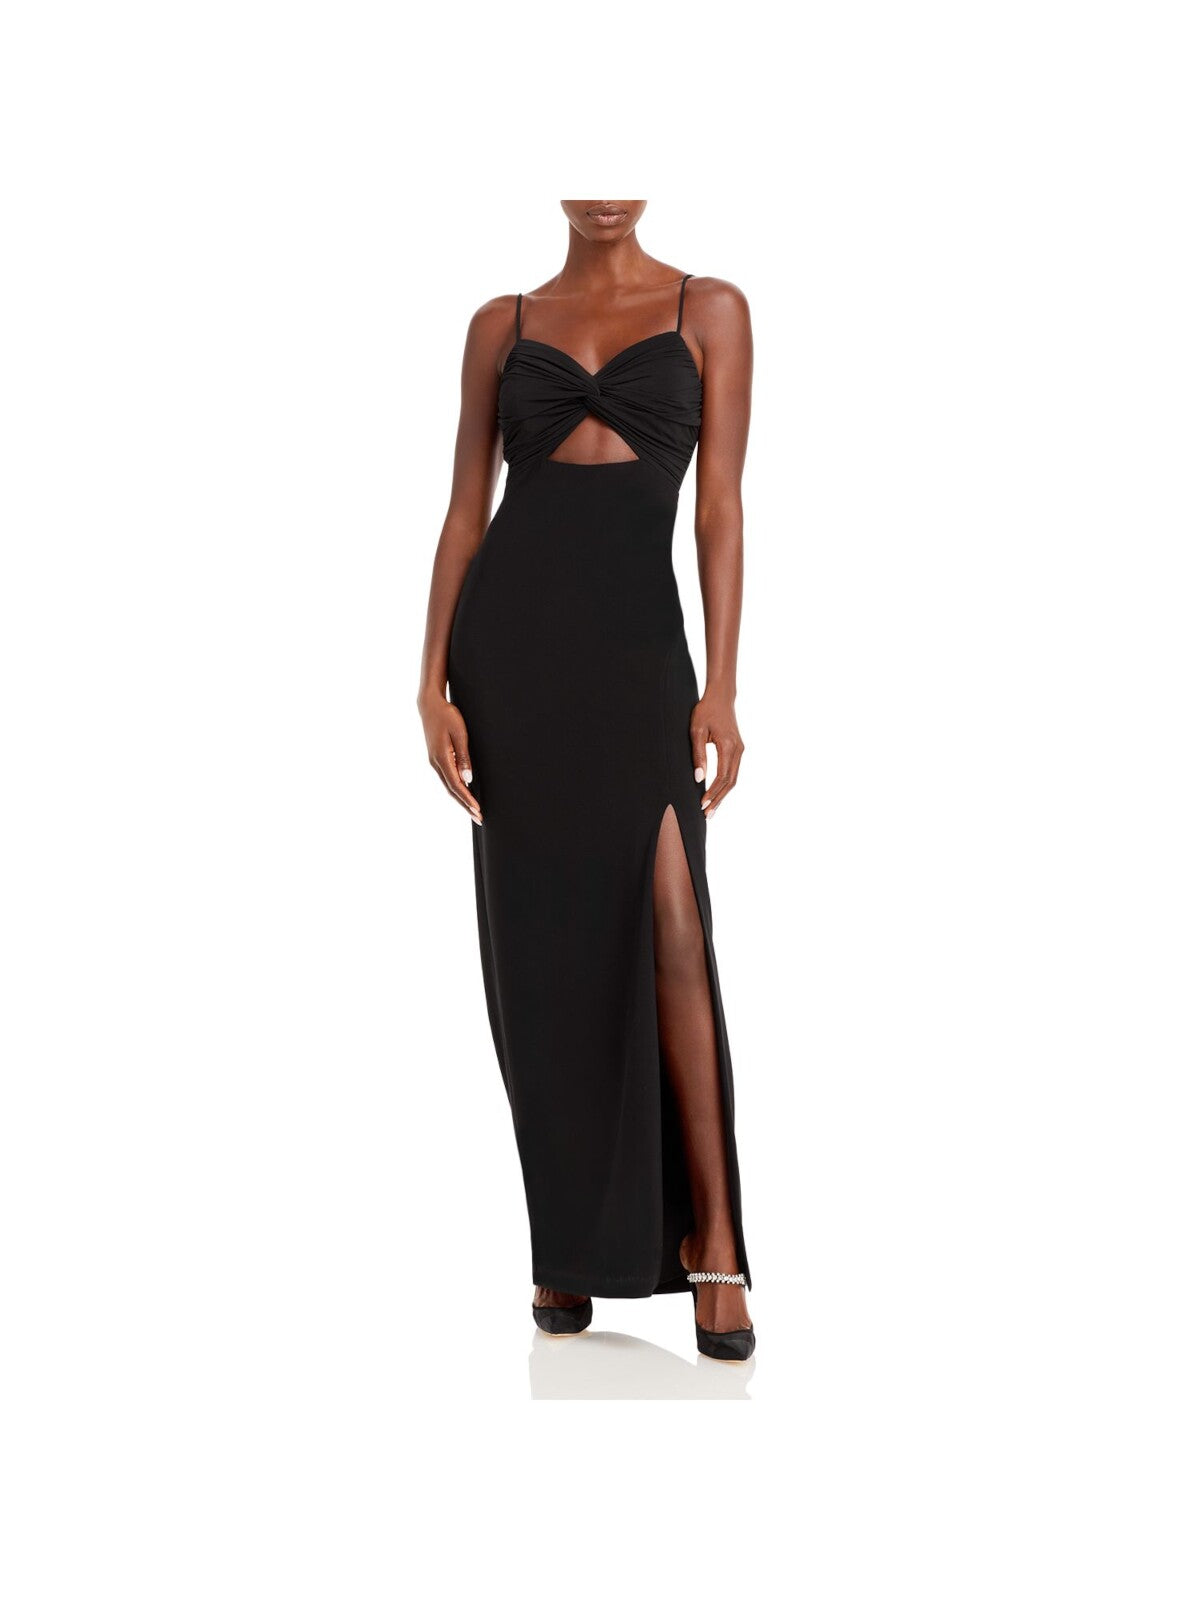 AQUA FORMAL Womens Black Stretch Zippered Twist Front Cutout Ruched High Slit Lined Spaghetti Strap Sweetheart Neckline Full-Length Evening Gown Dress 4